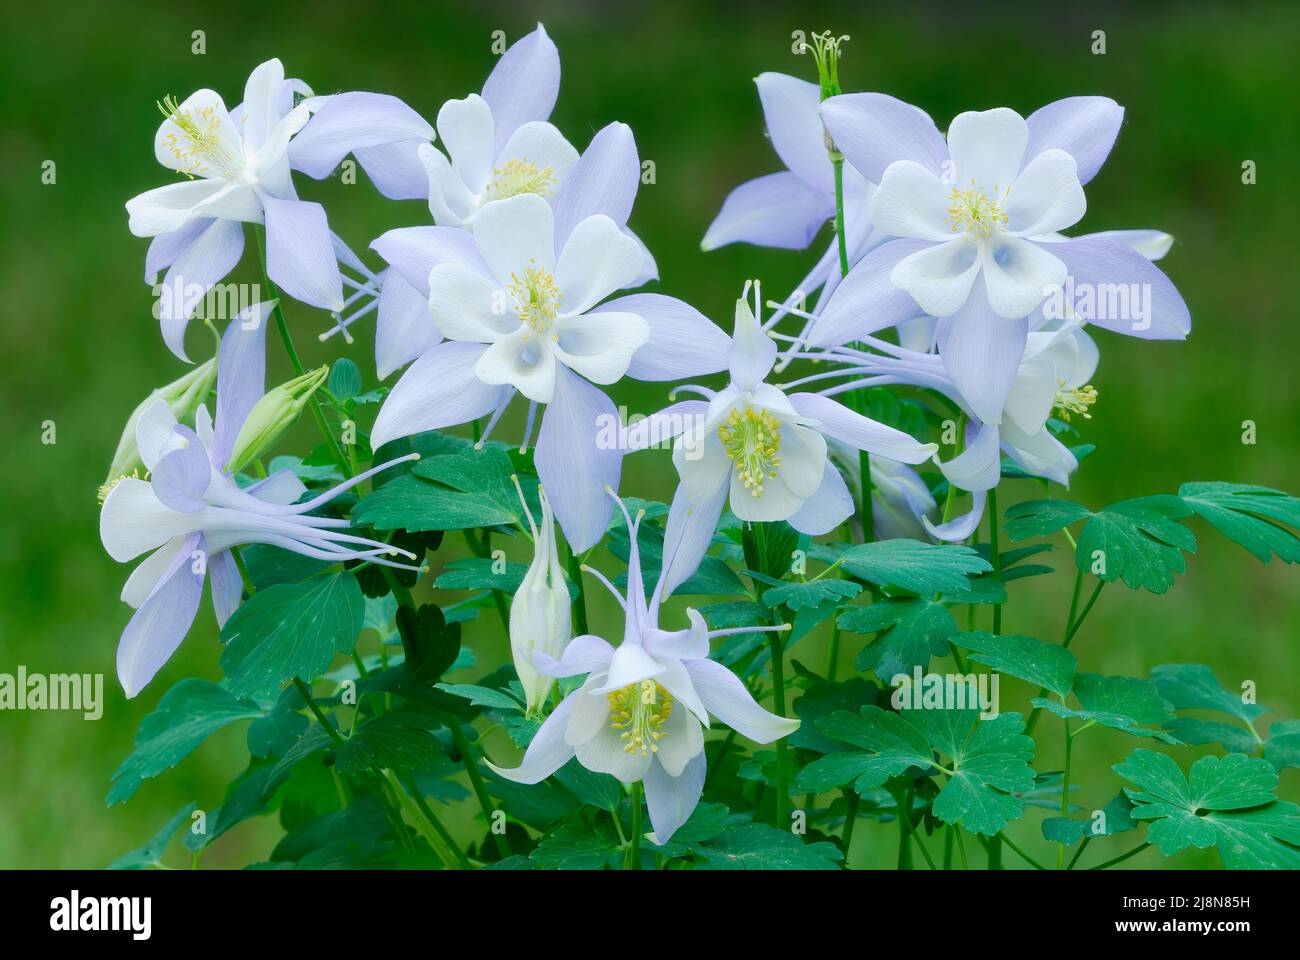 Aquilegia coerulea, columbine flowers with leaves. Colorado blue white. Front view, closeup. Blurred green background, isolated. Trencin, Slovakia. Stock Photo